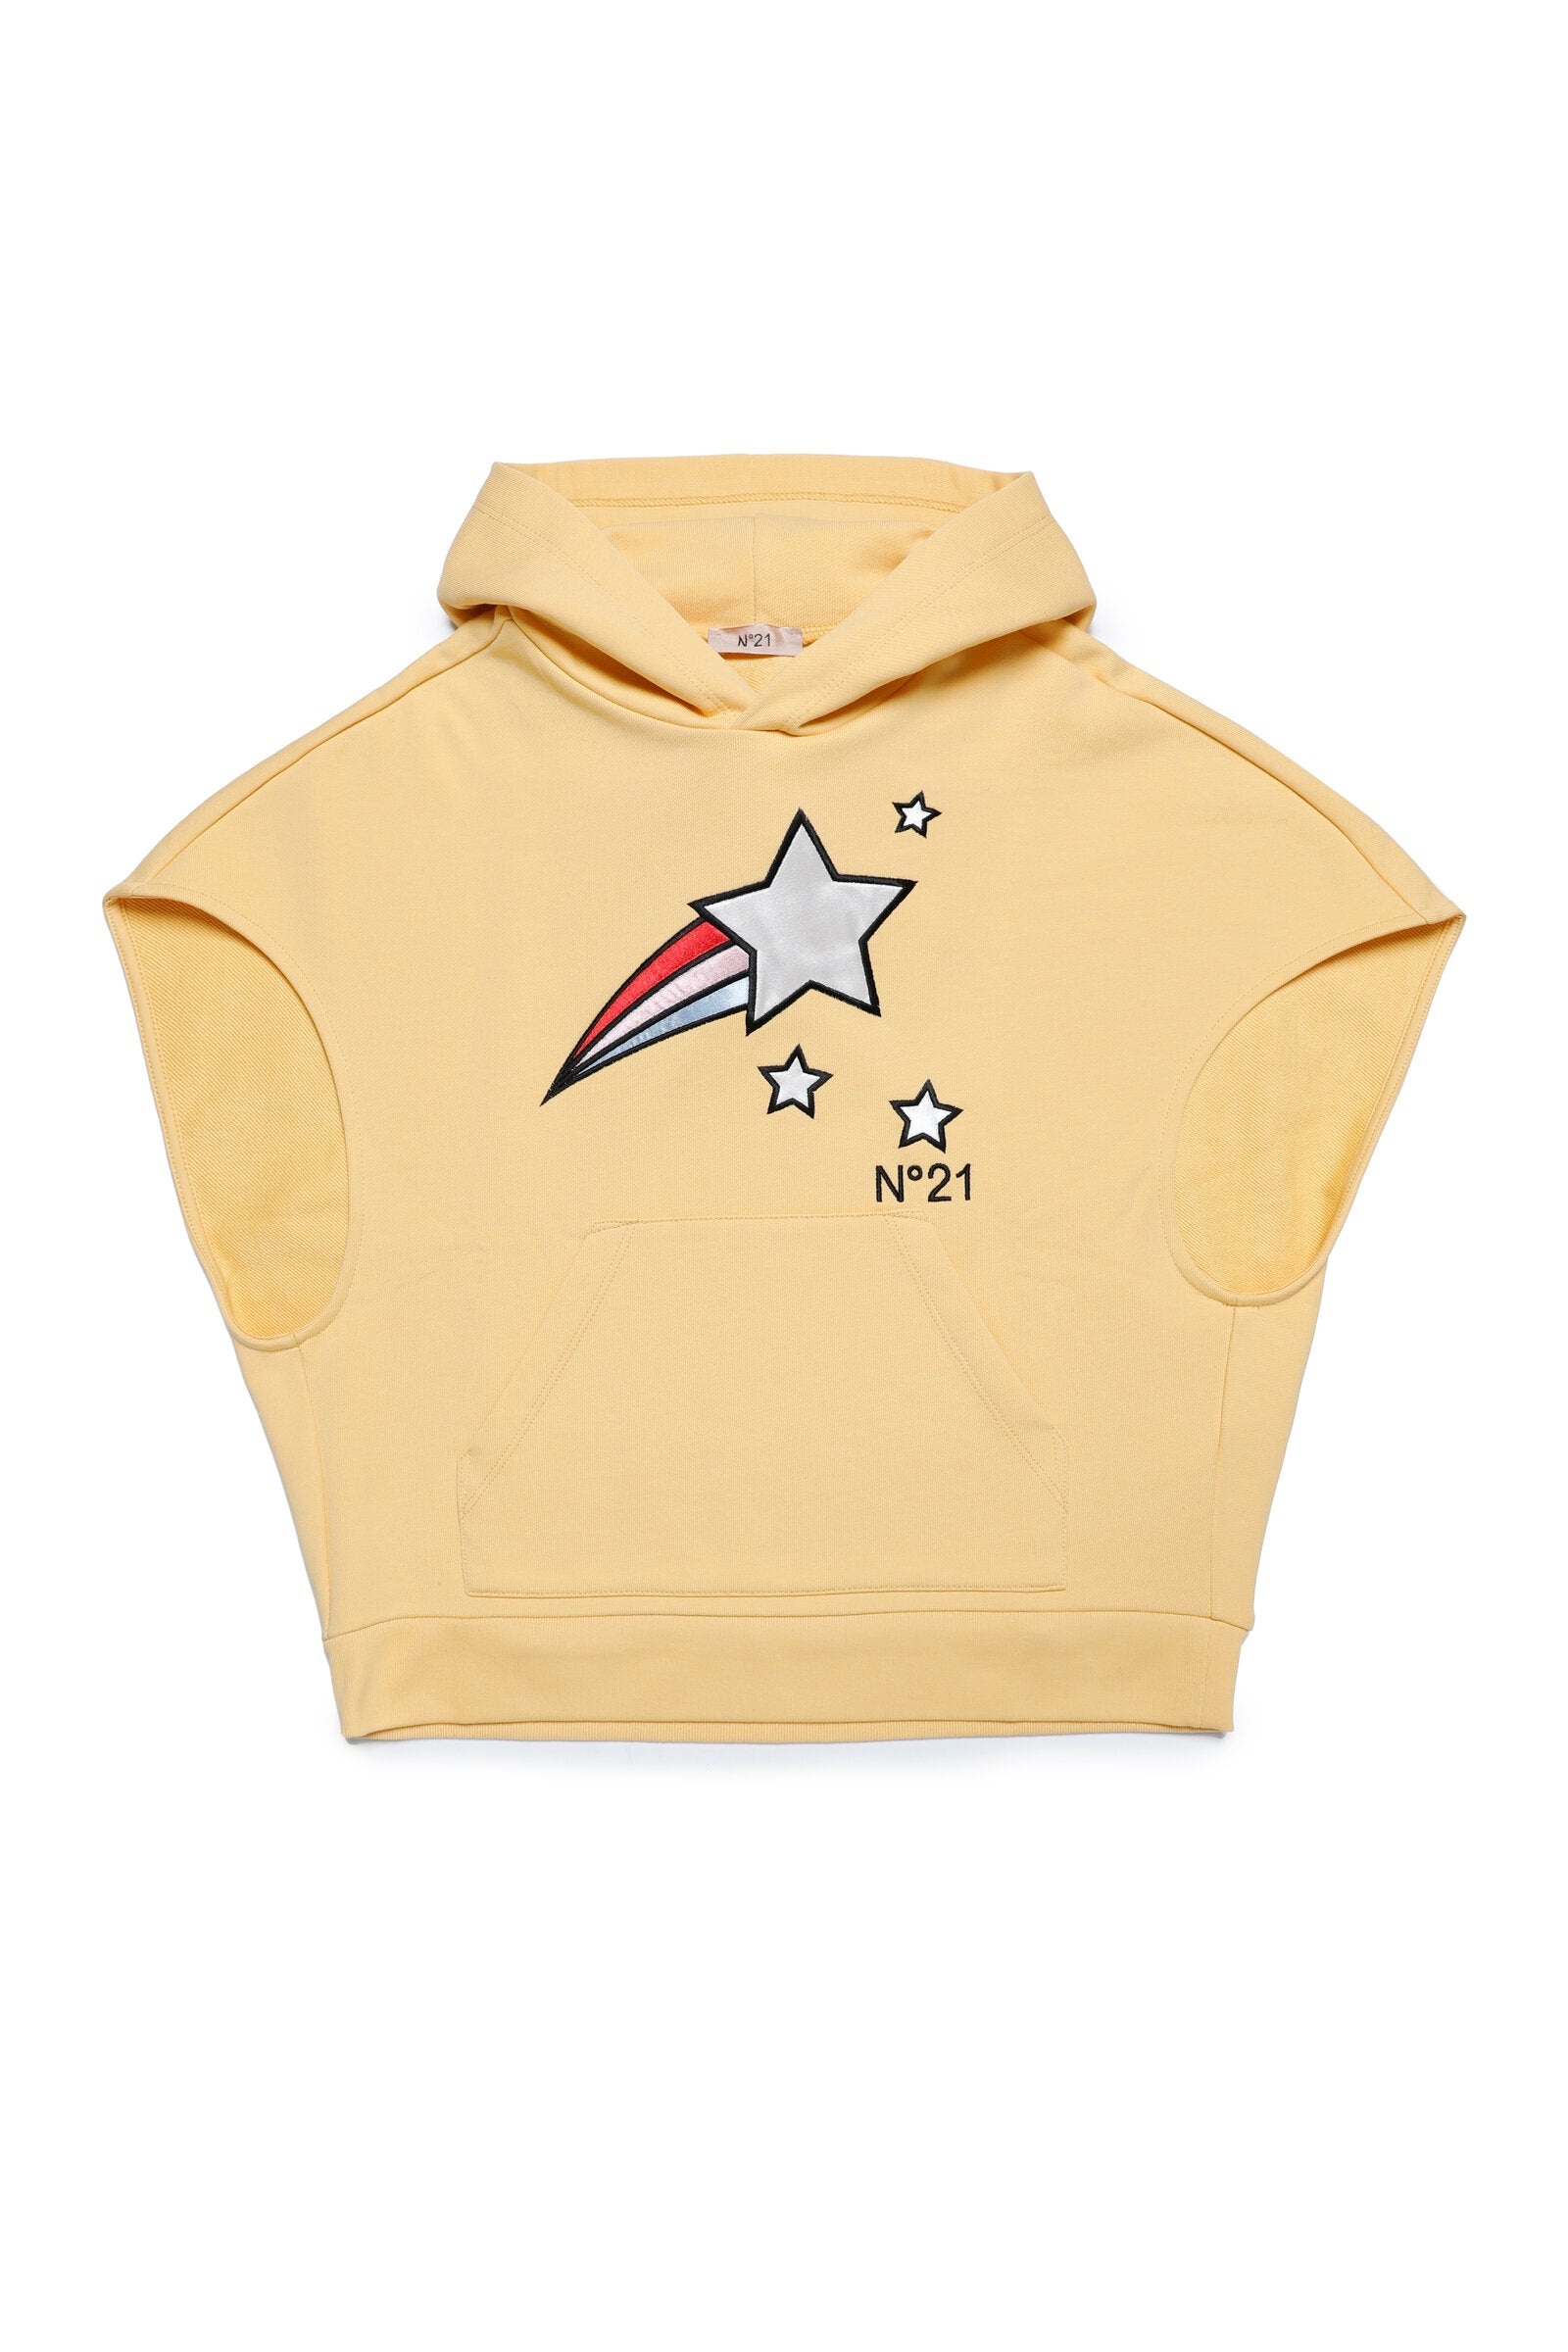 Over sweatshirt "hooded" style with star graphics